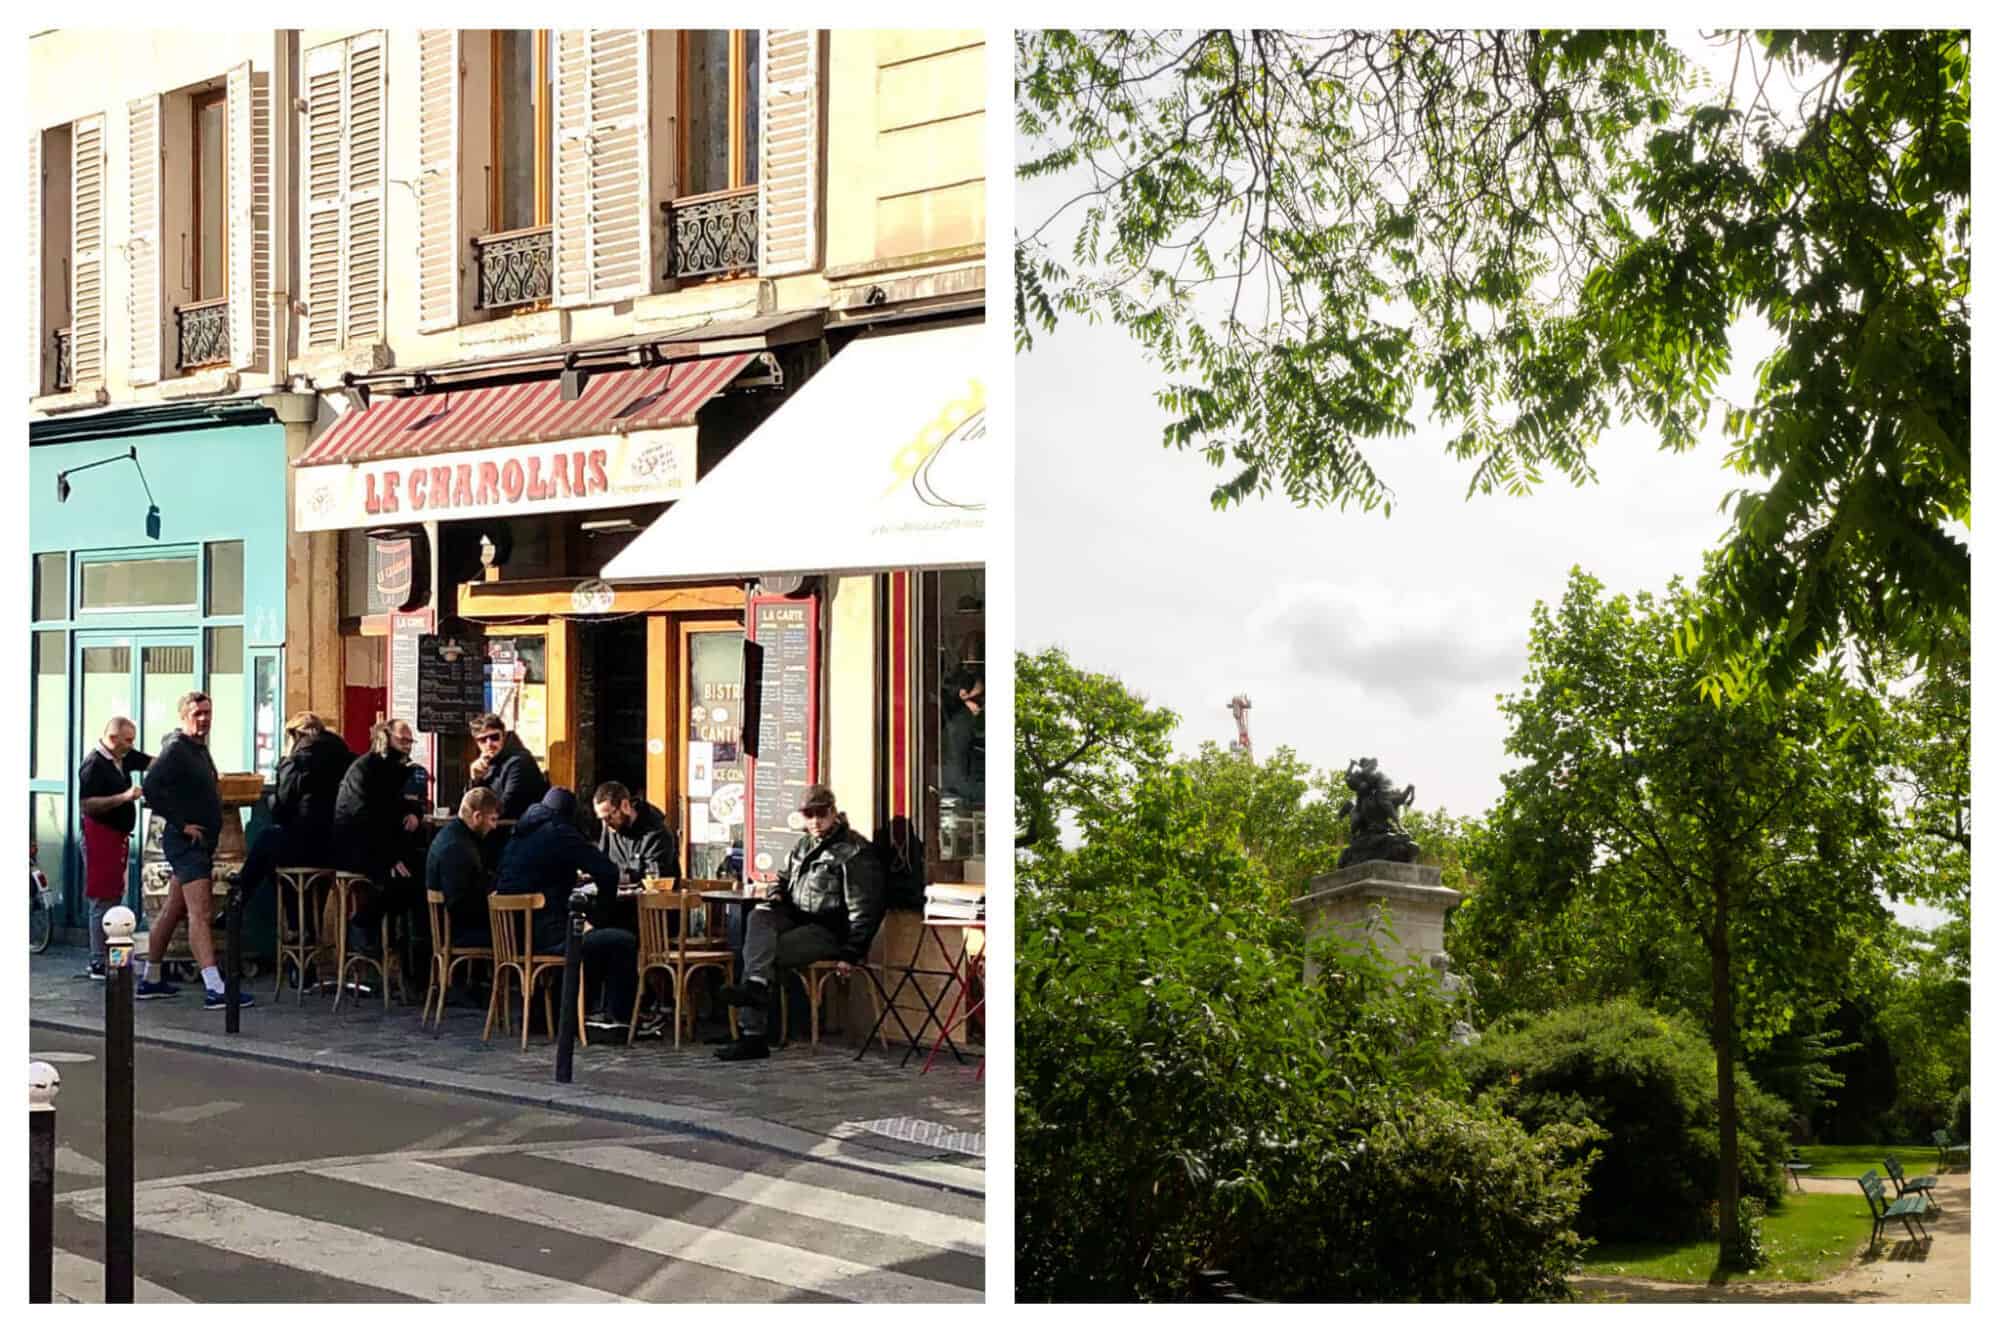 Left: A busy terrace filled with people at a Parisian bistro at the Place d'Aligre, Right: Trees and shrubbery are filled with bright green leaves on a summer day in a square in Paris